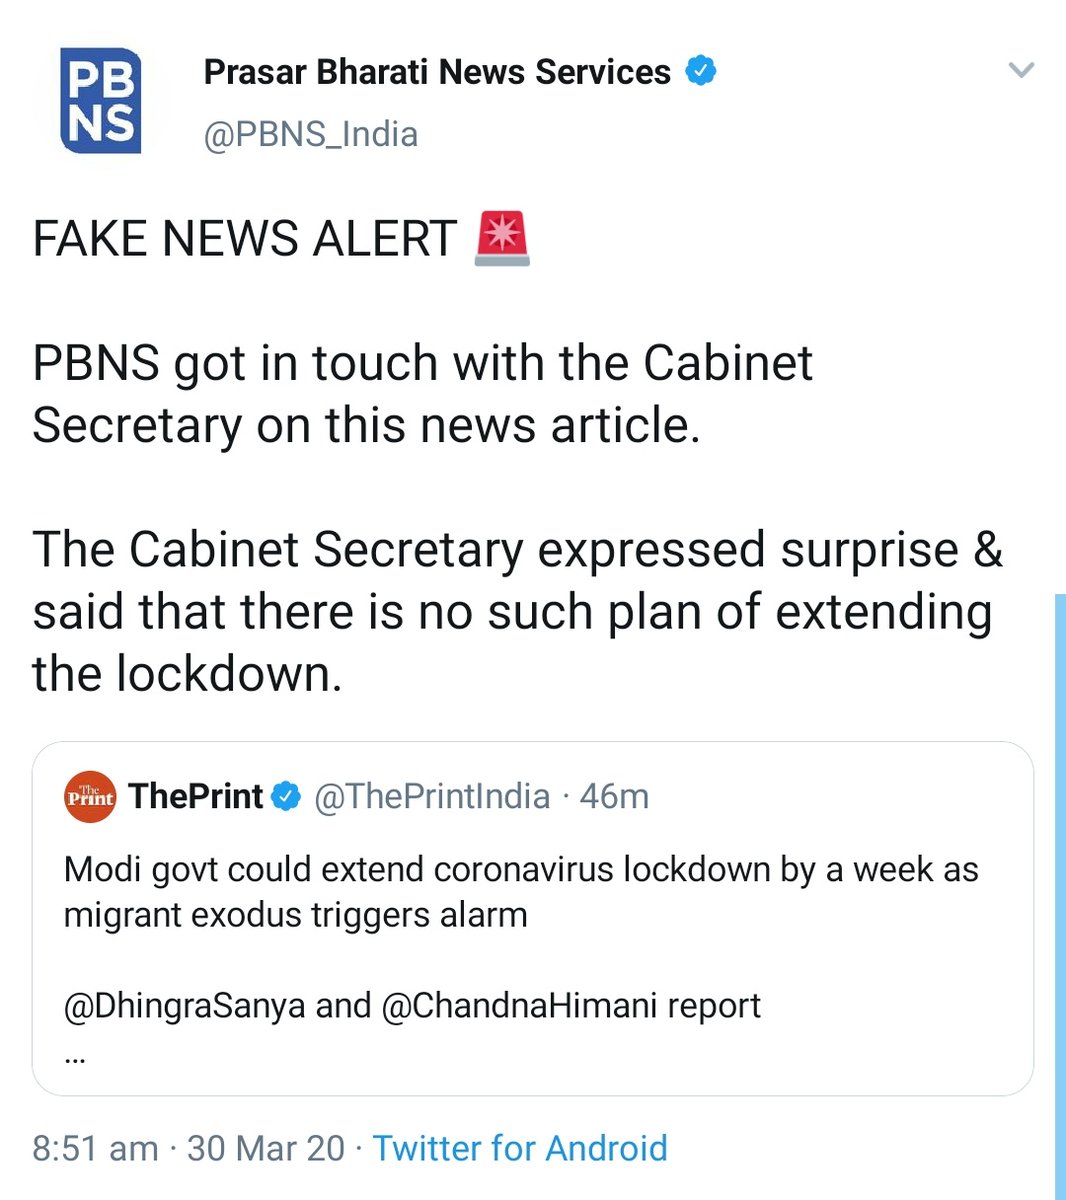 Shekhar Gupta's The Print spread Fake News that Lockdown will be extended.Media houses are putting up such Fake stories only to create panic so that people suffer and they can use it to attack govt.But if you question them, they will cry freedom of expression